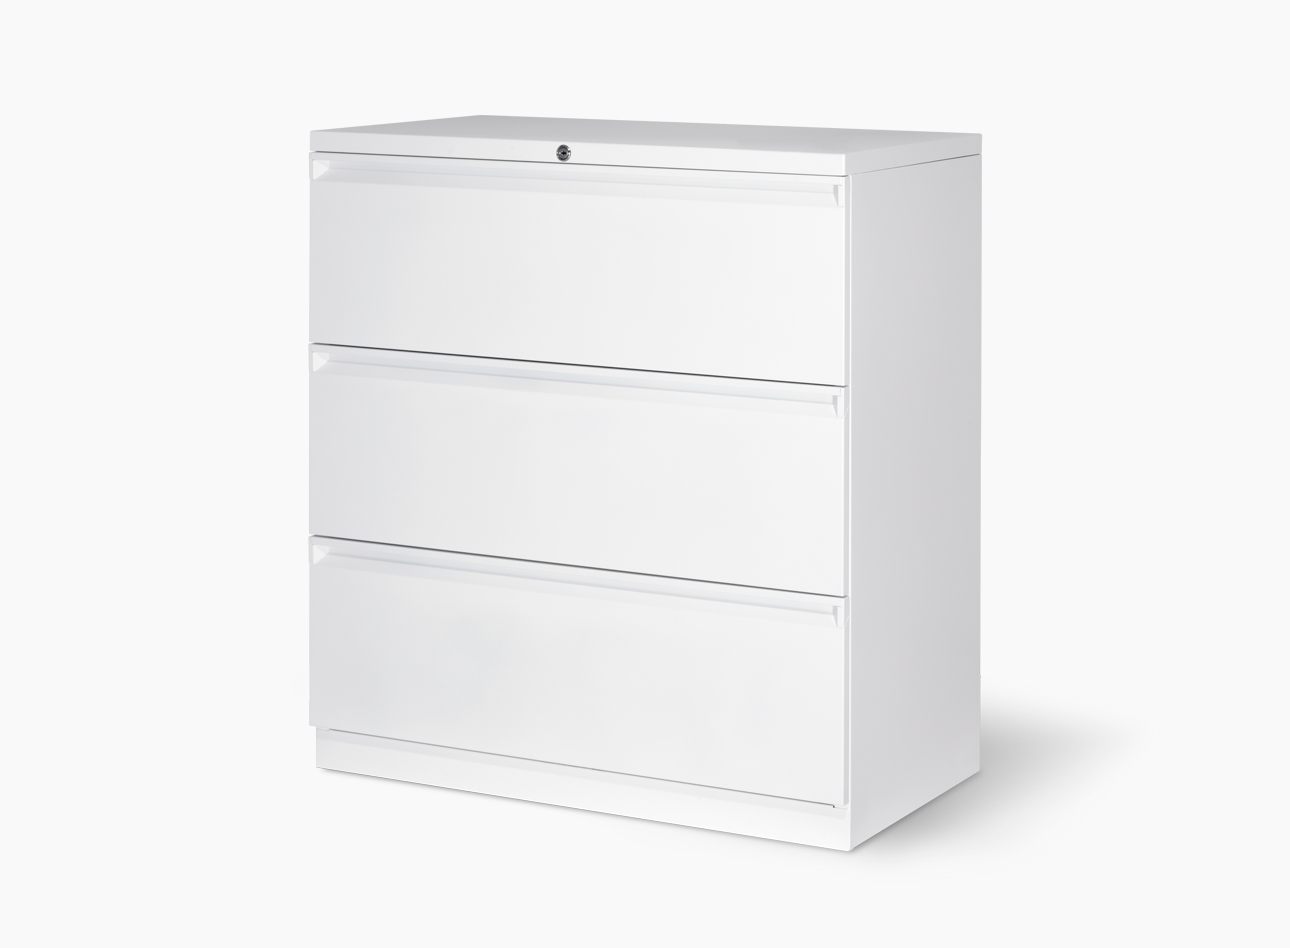 S-Series SD Lateral Drawer Cabinet